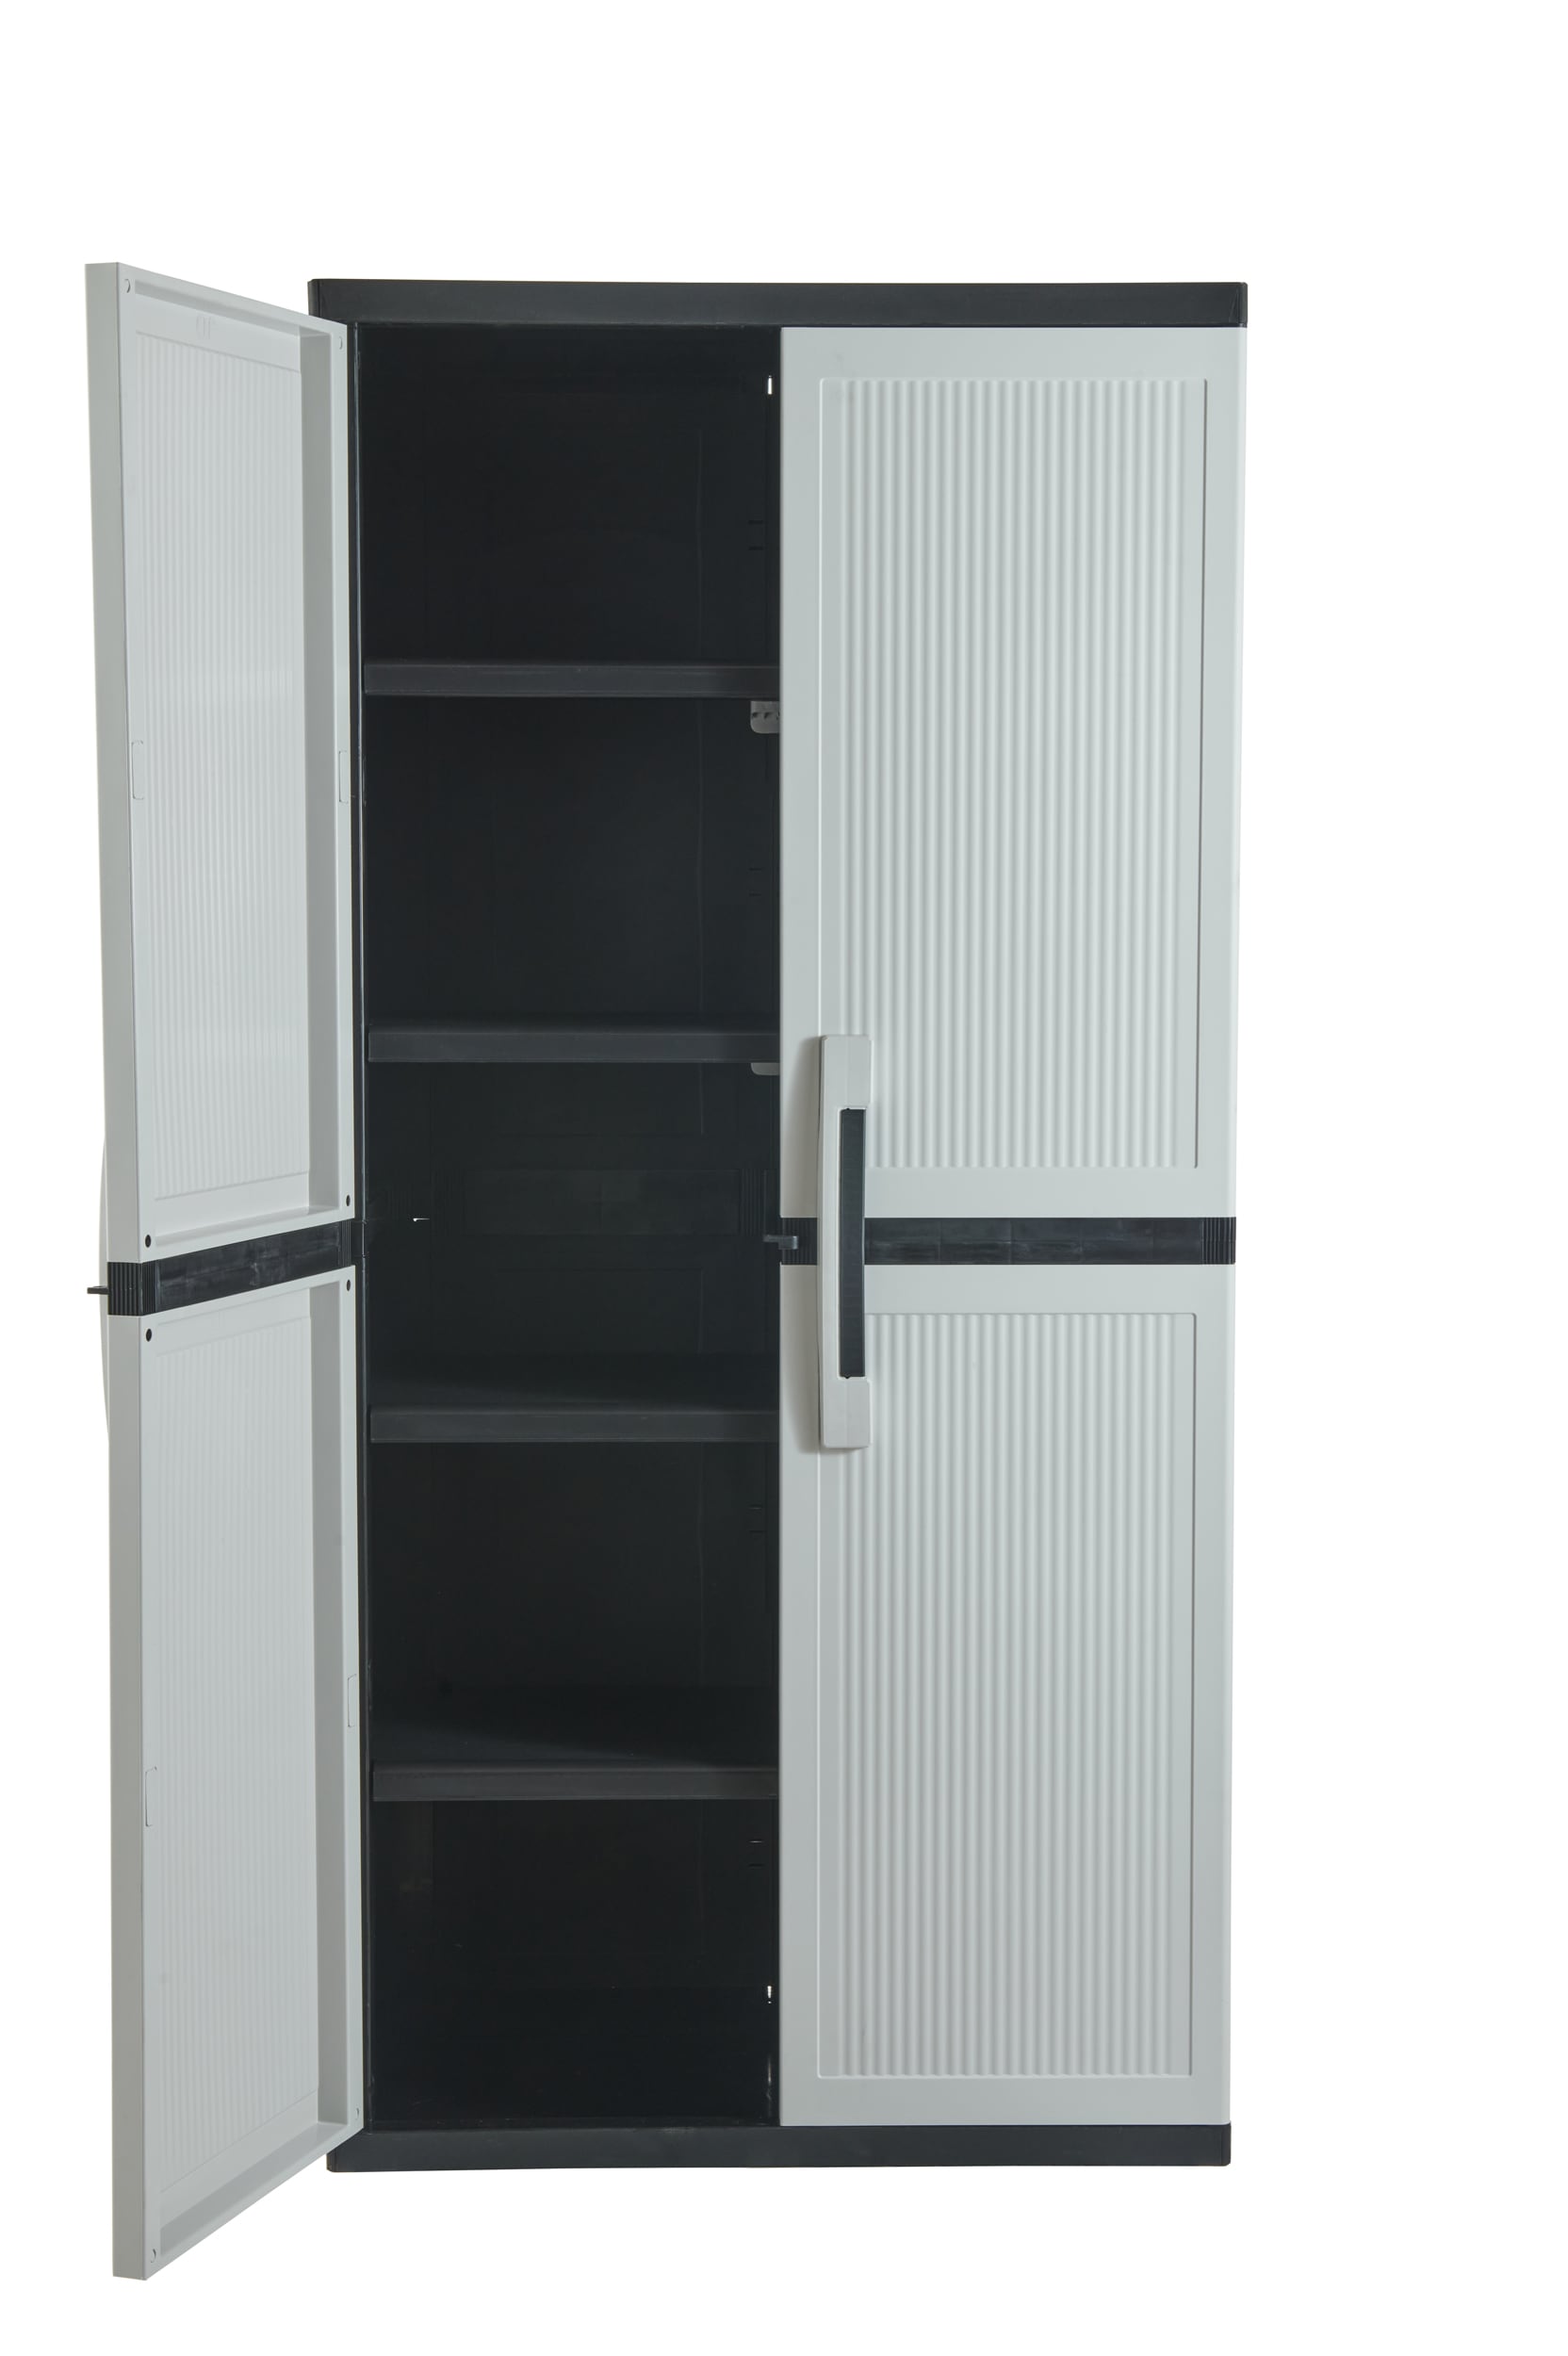 mengsel essence Scenario Keter Plastic Freestanding Garage Cabinet in Gray (34.5-in W x 70.8-in H x  17.5-in D) in the Garage Cabinets department at Lowes.com